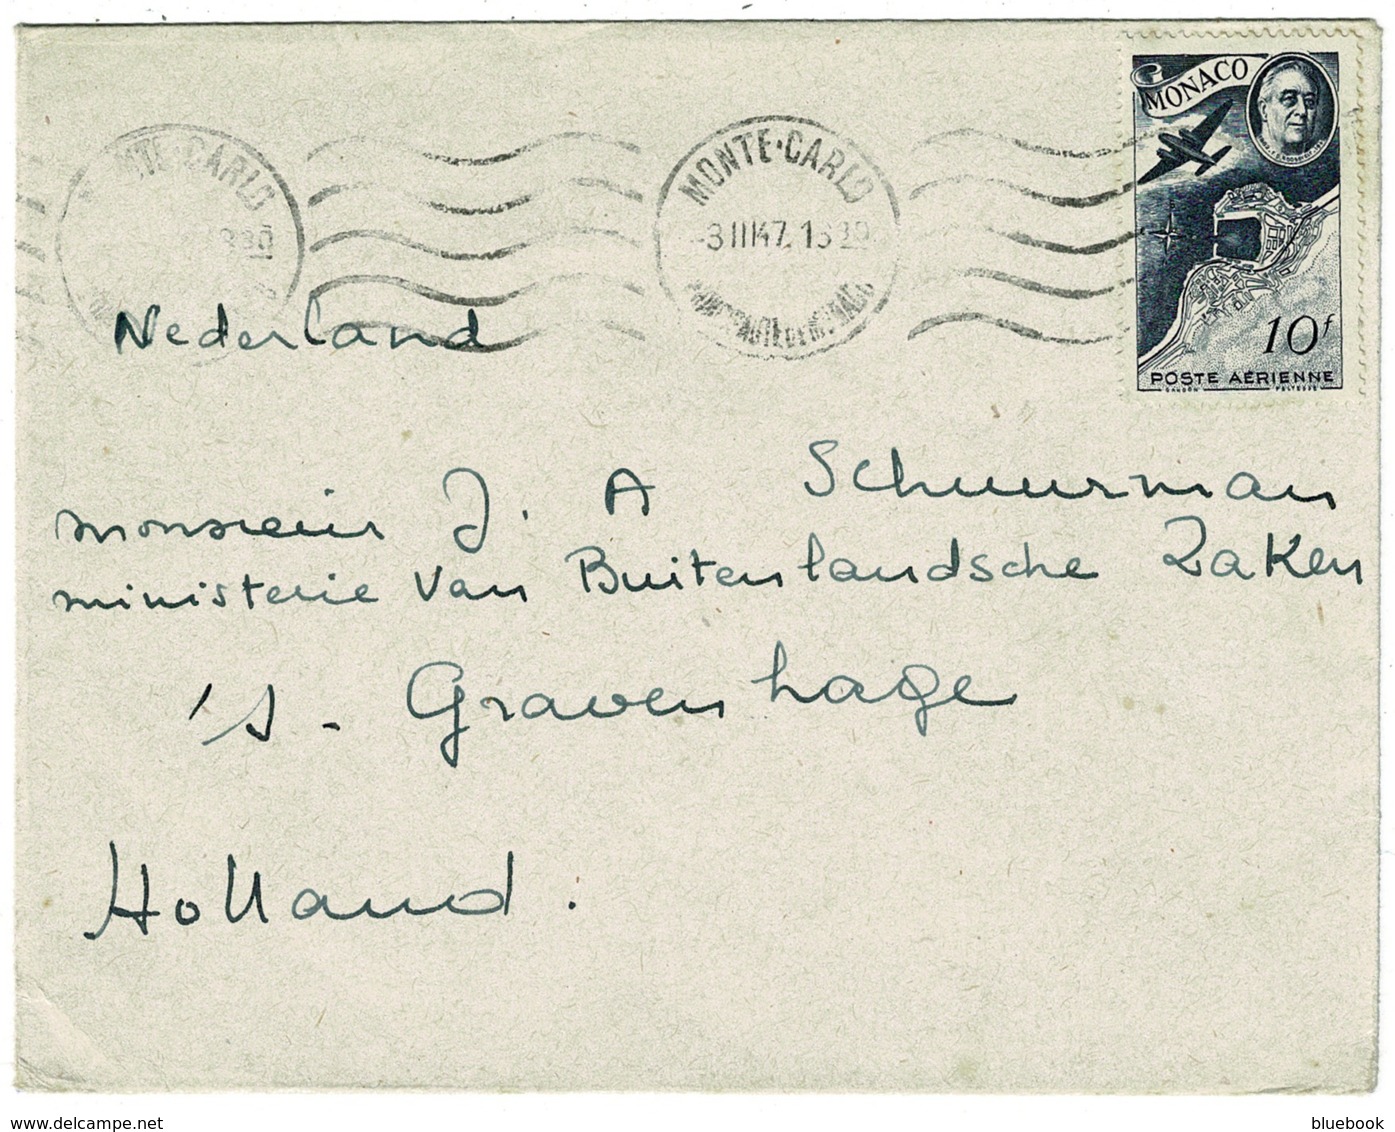 Ref 1254 - 1947 Single 10f Franking - Roosevelt Air Stamp - Monaco Monte-Carlo To Holland - Covers & Documents